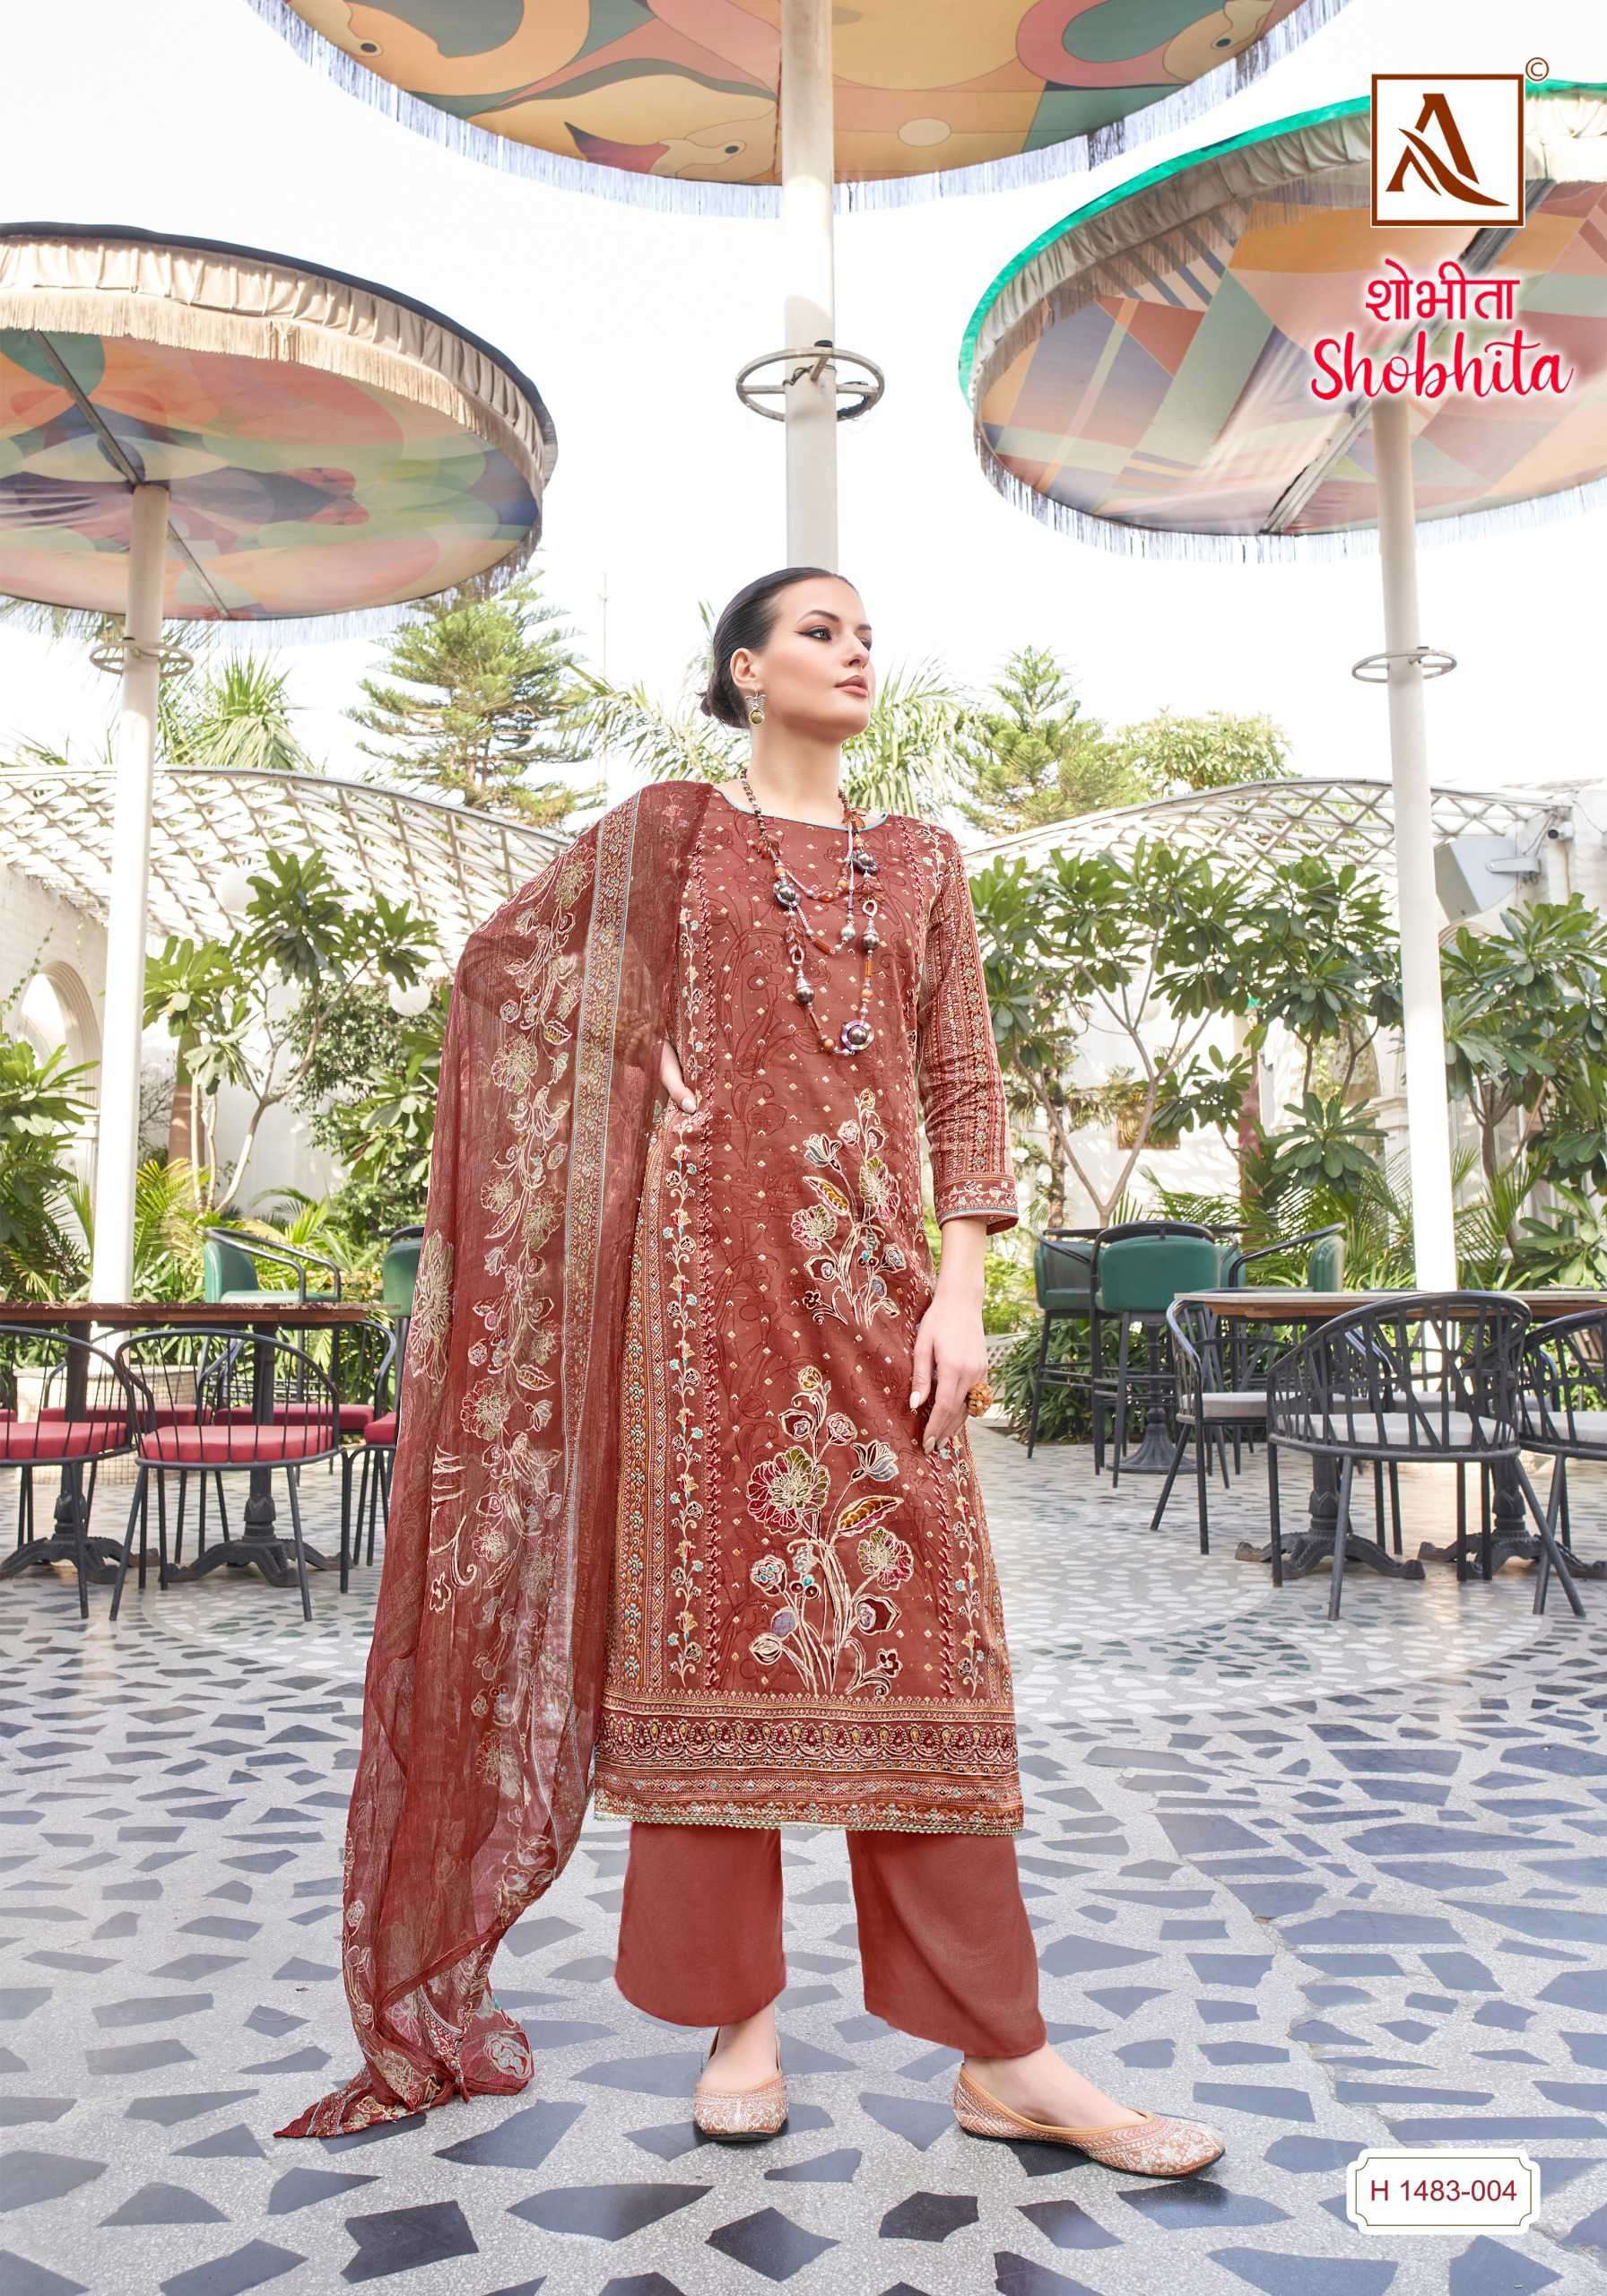 Alok Suit Shobita Jam Cotton With Embroidery Work Salwar Suits Supplier In Surat